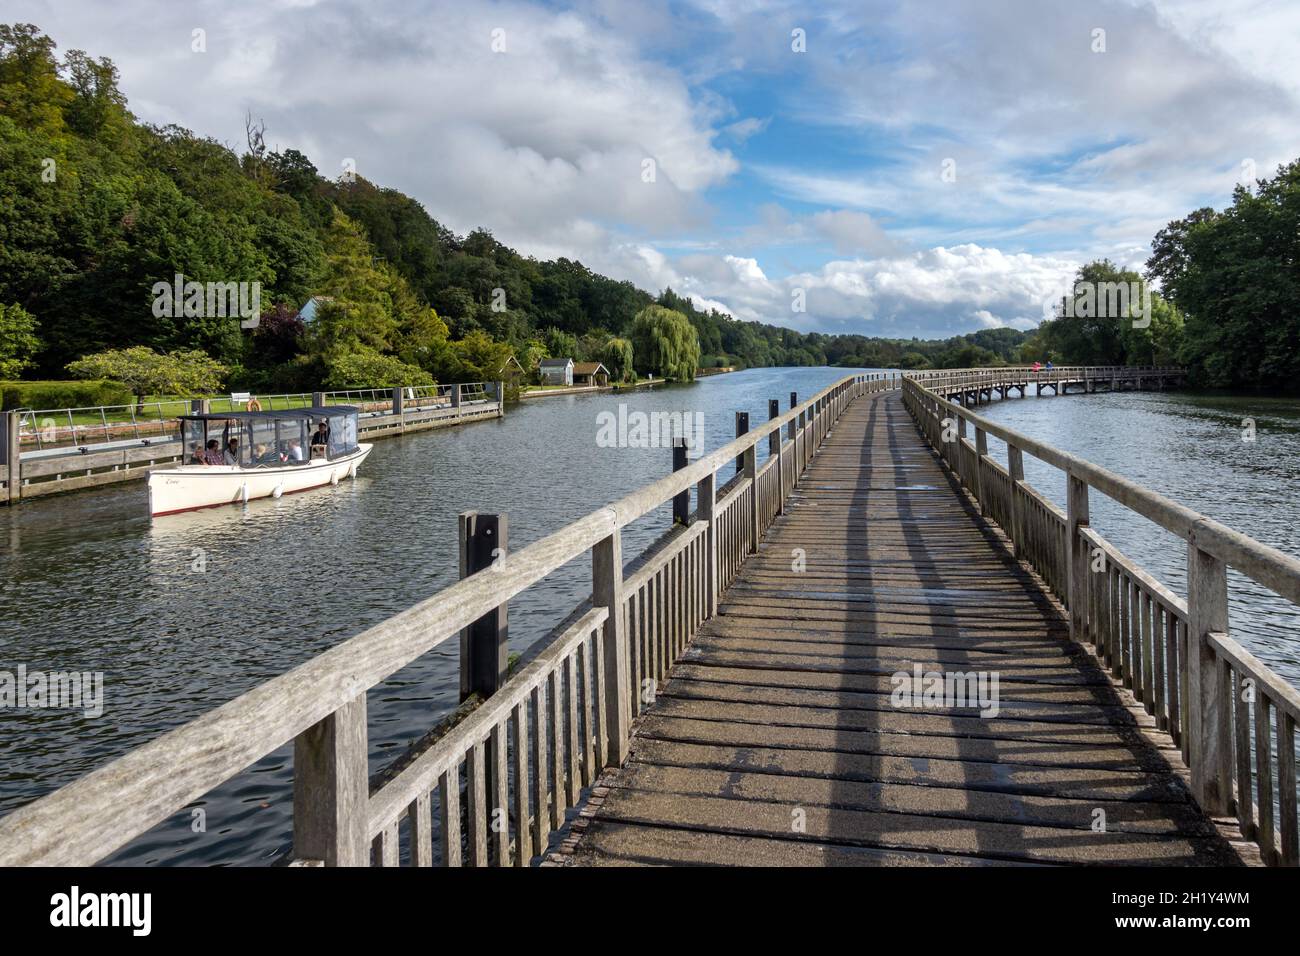 Marsh Lock walkway, part of the Thames path, over the River Thames at Henley-on-Thames in Oxfordshire, England. Stock Photo